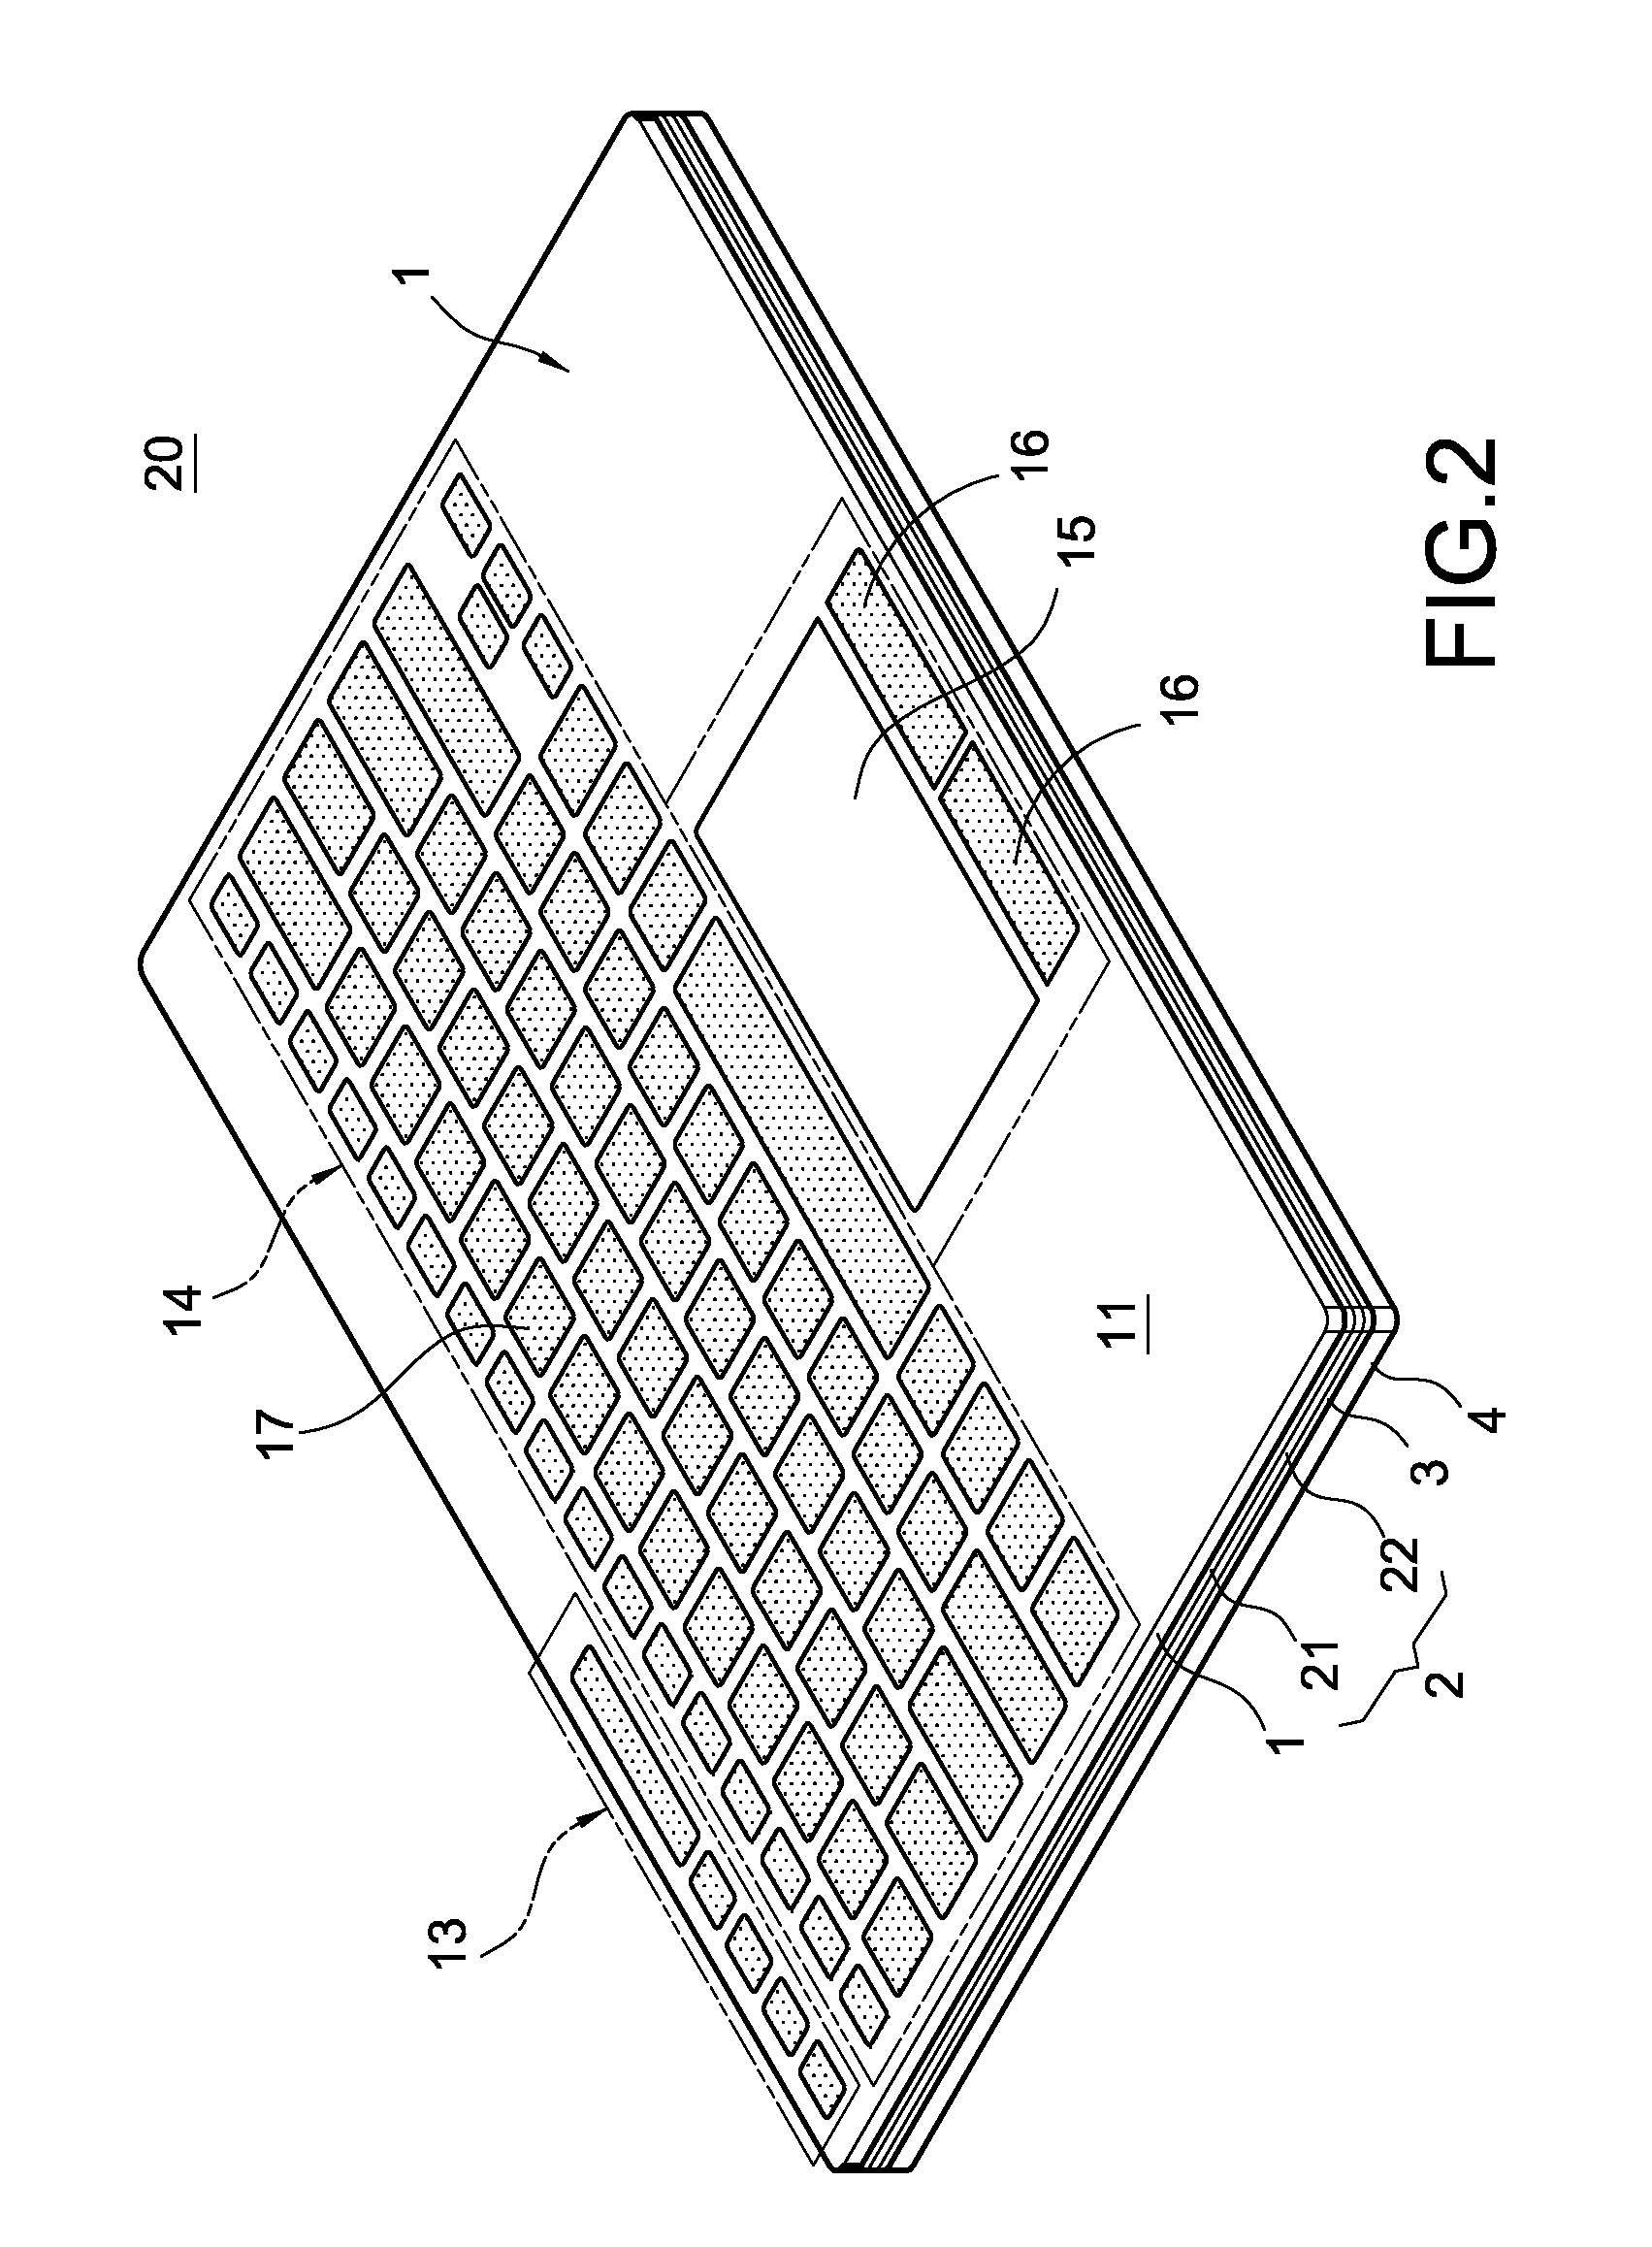 Membrane touch keyboard structure for notebook computers